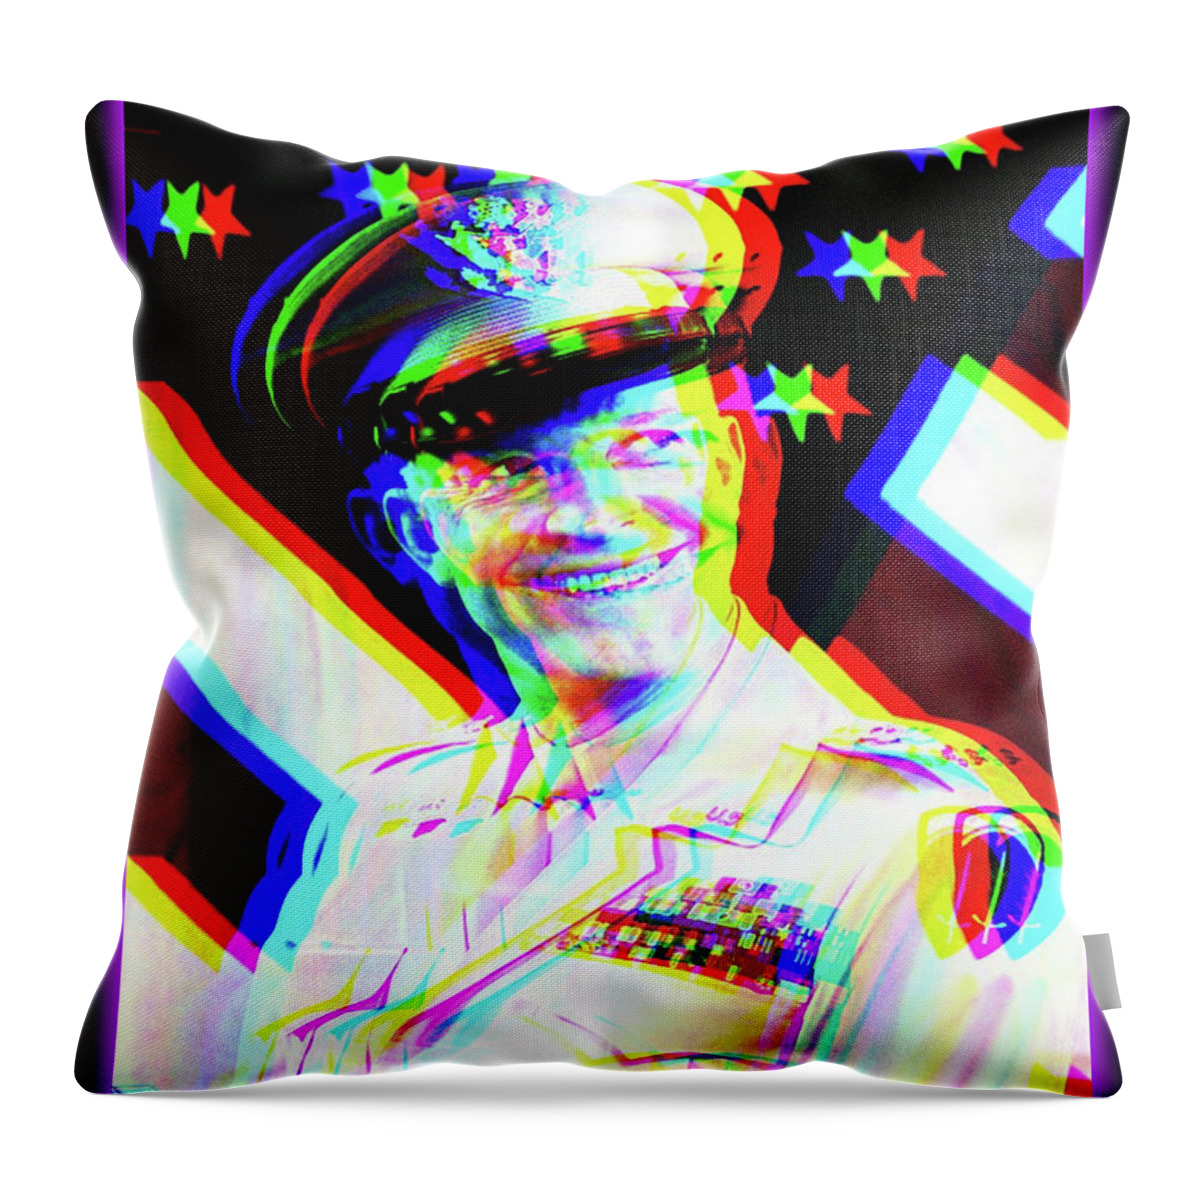 Wunderleart Throw Pillow featuring the digital art Ike V1a by Wunderle